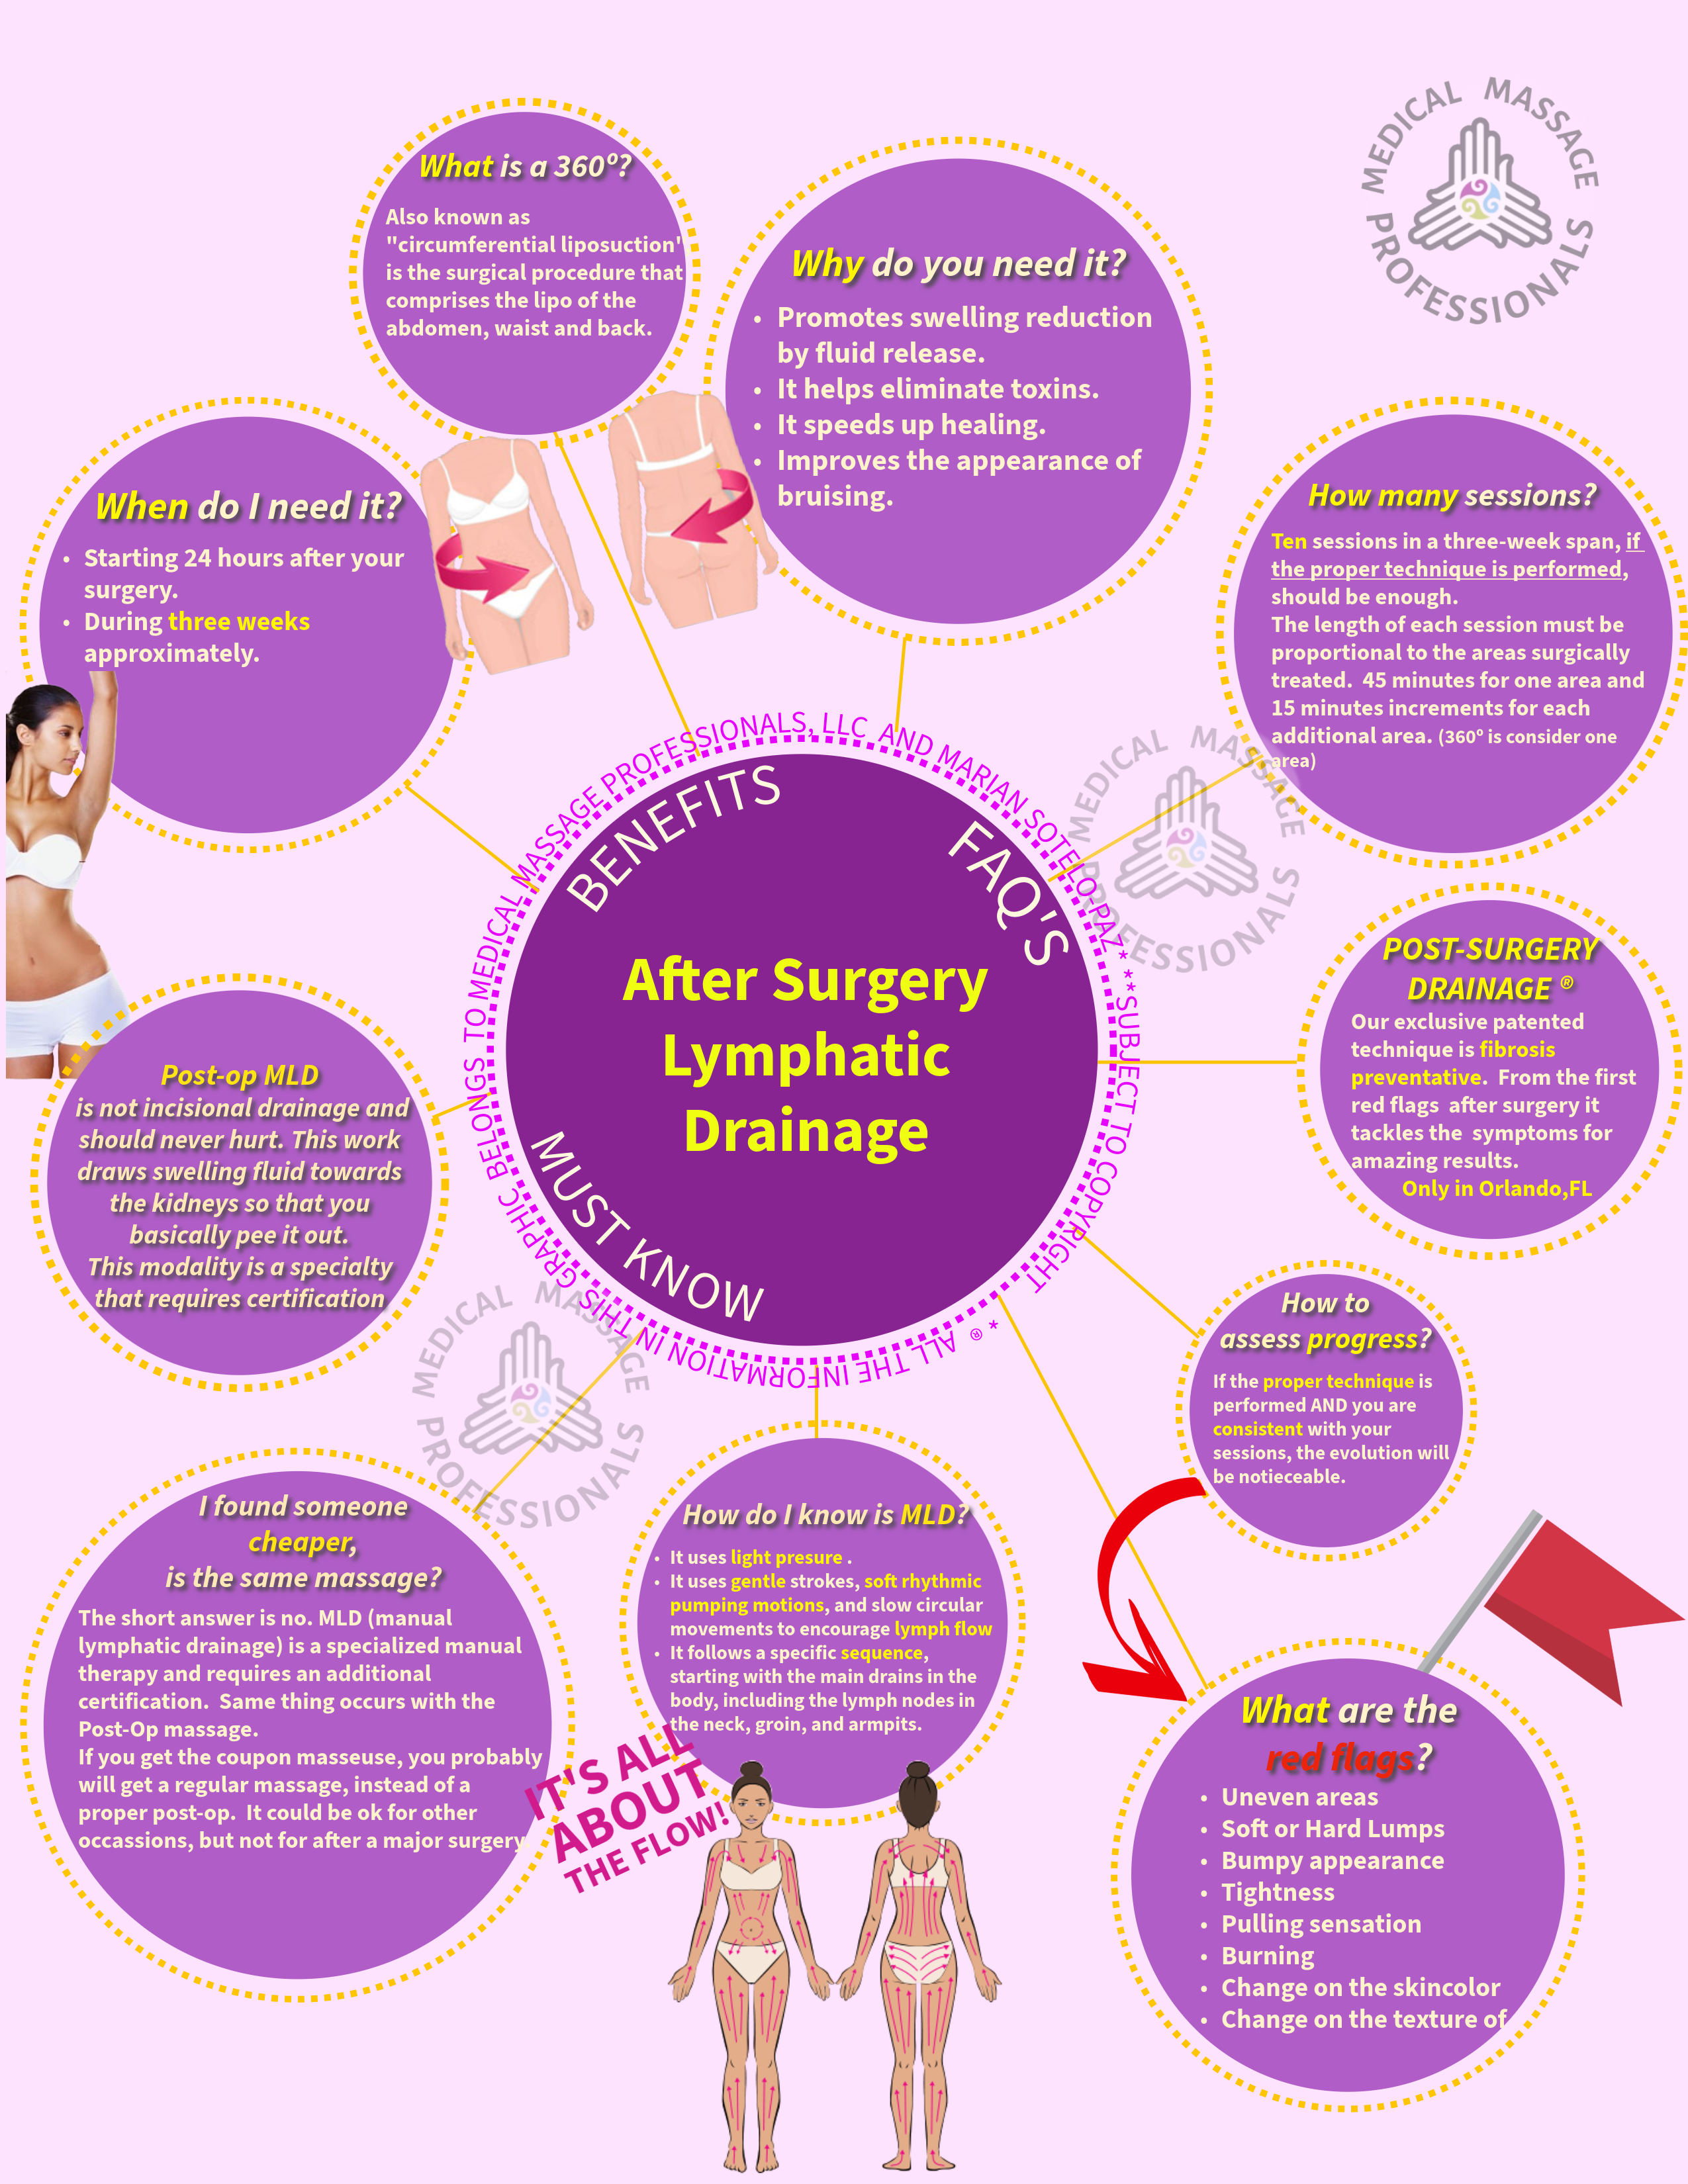 Lymphatic Drainage After Cosmetic Surgery